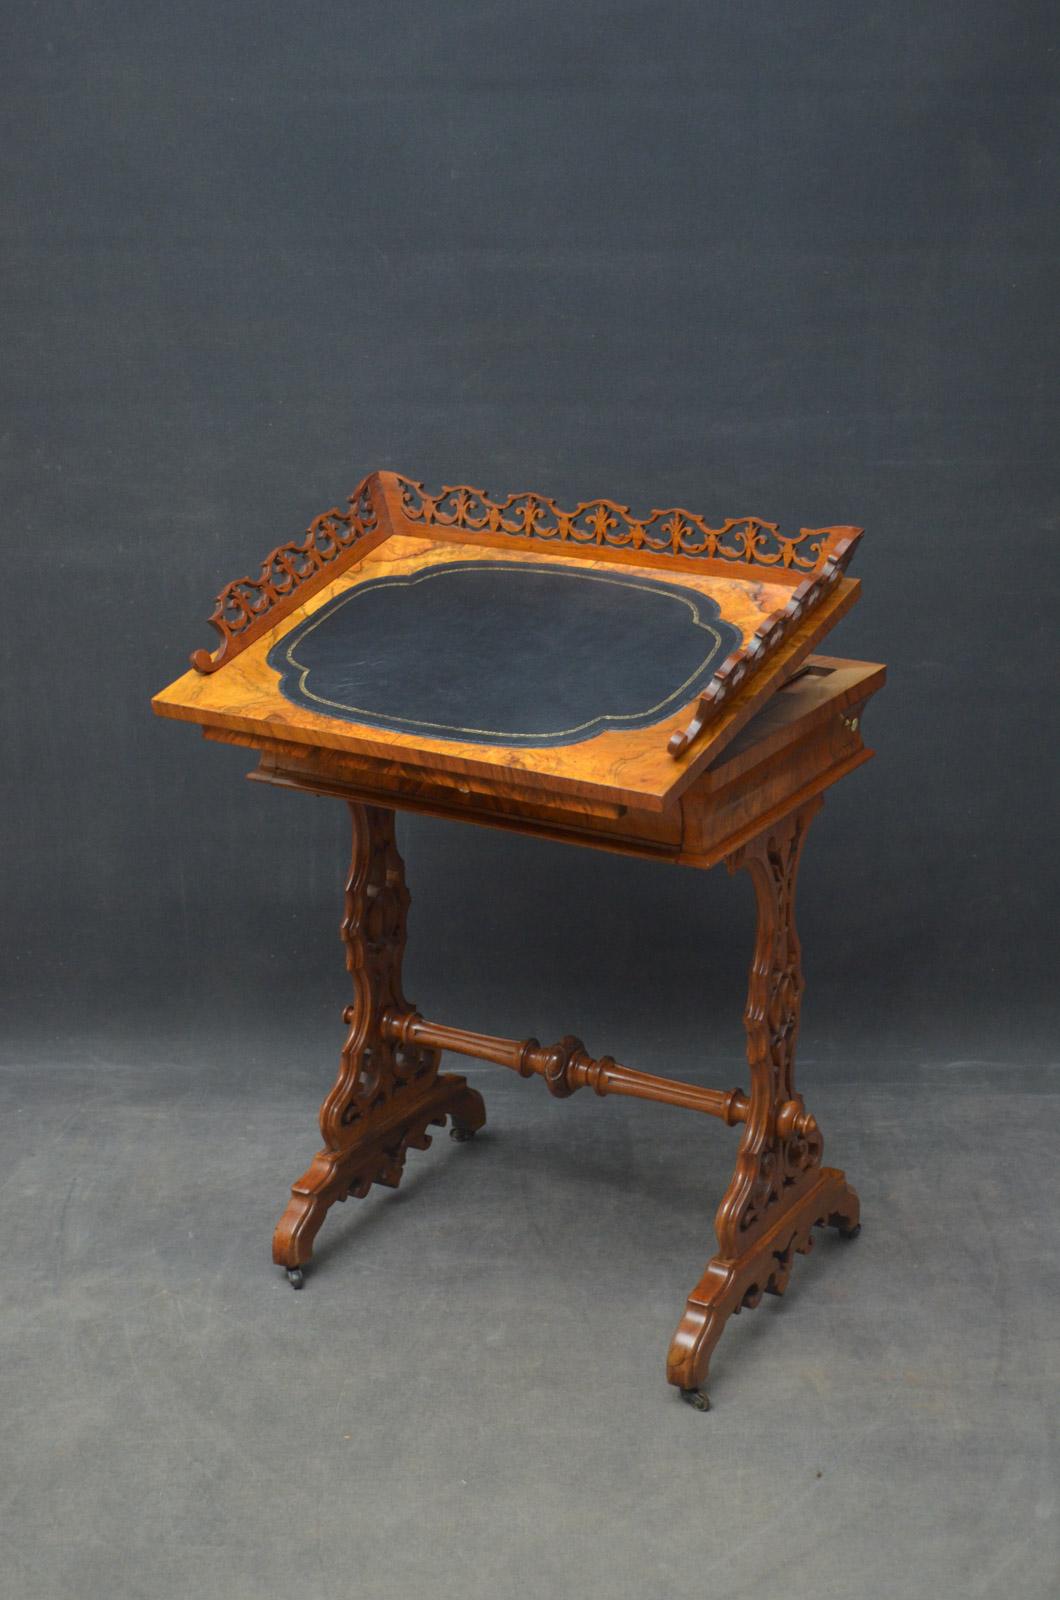 Sn4628, unusual 19th century figured walnut writing table with side drawer, having fretwork gallery and leather writing surface to the top, above a concave drawer and chess and backgammon board, standing on finely carved supports united by turned